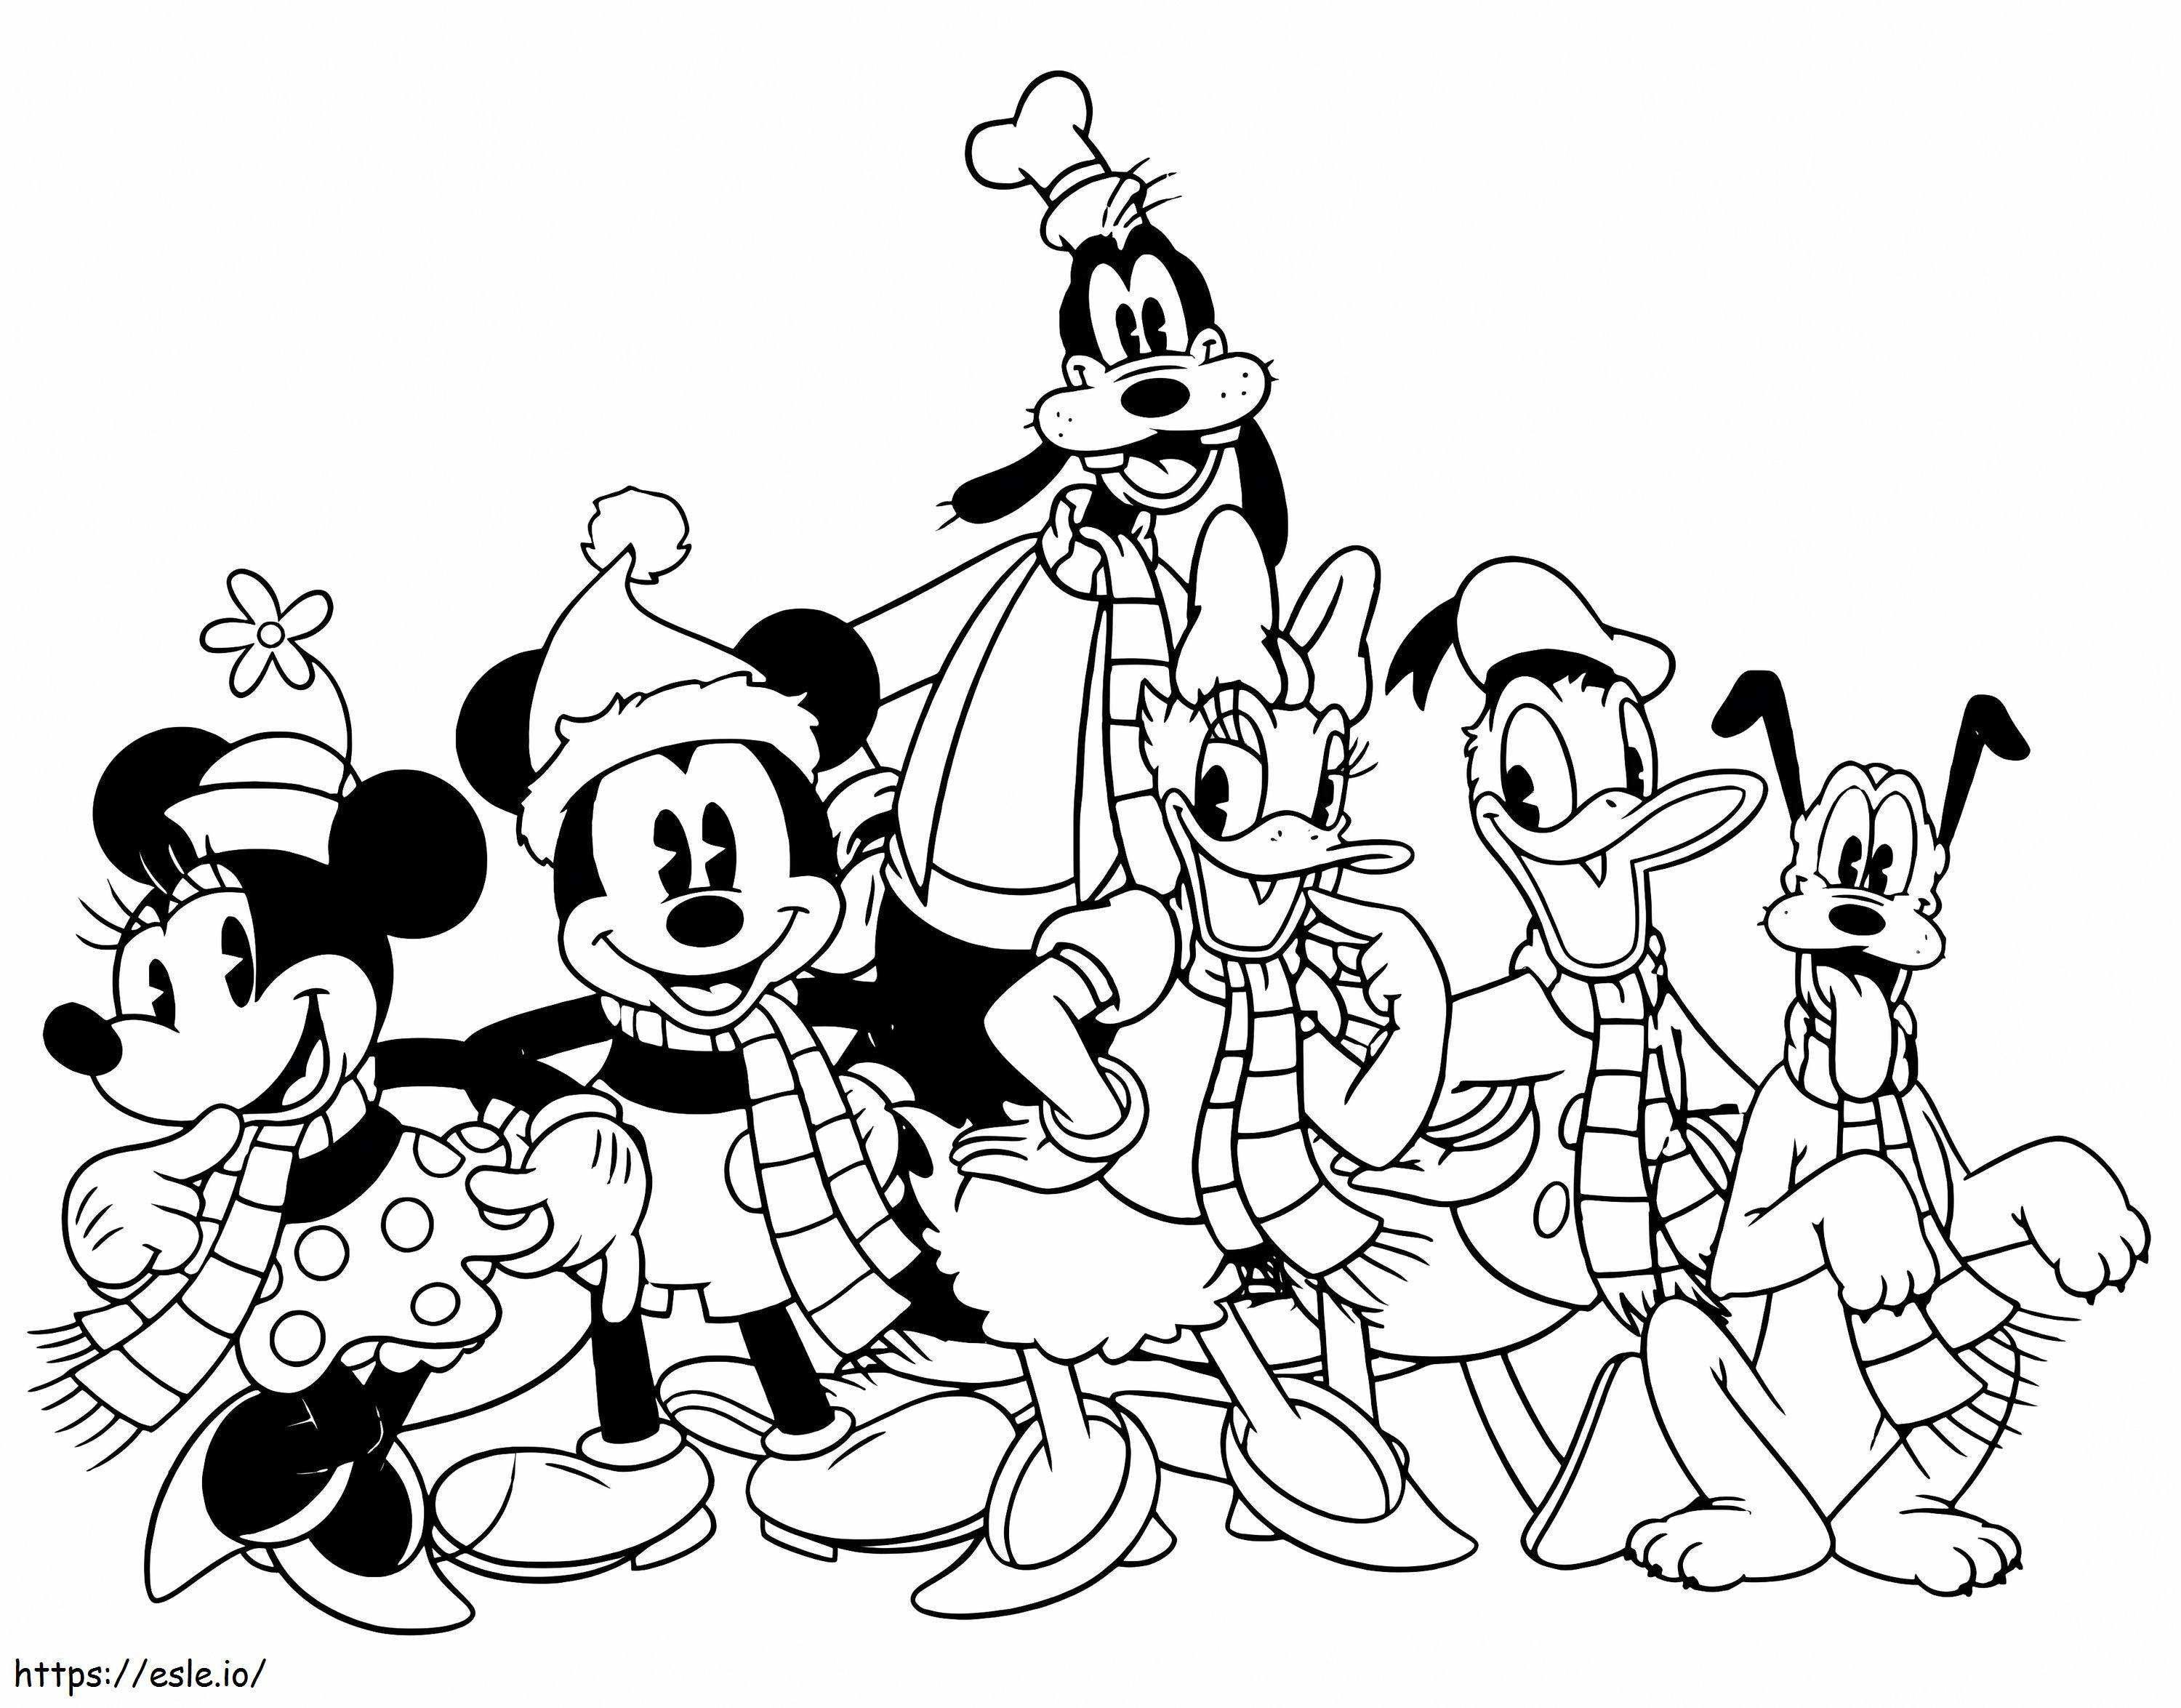 Happy Disney Characters coloring page